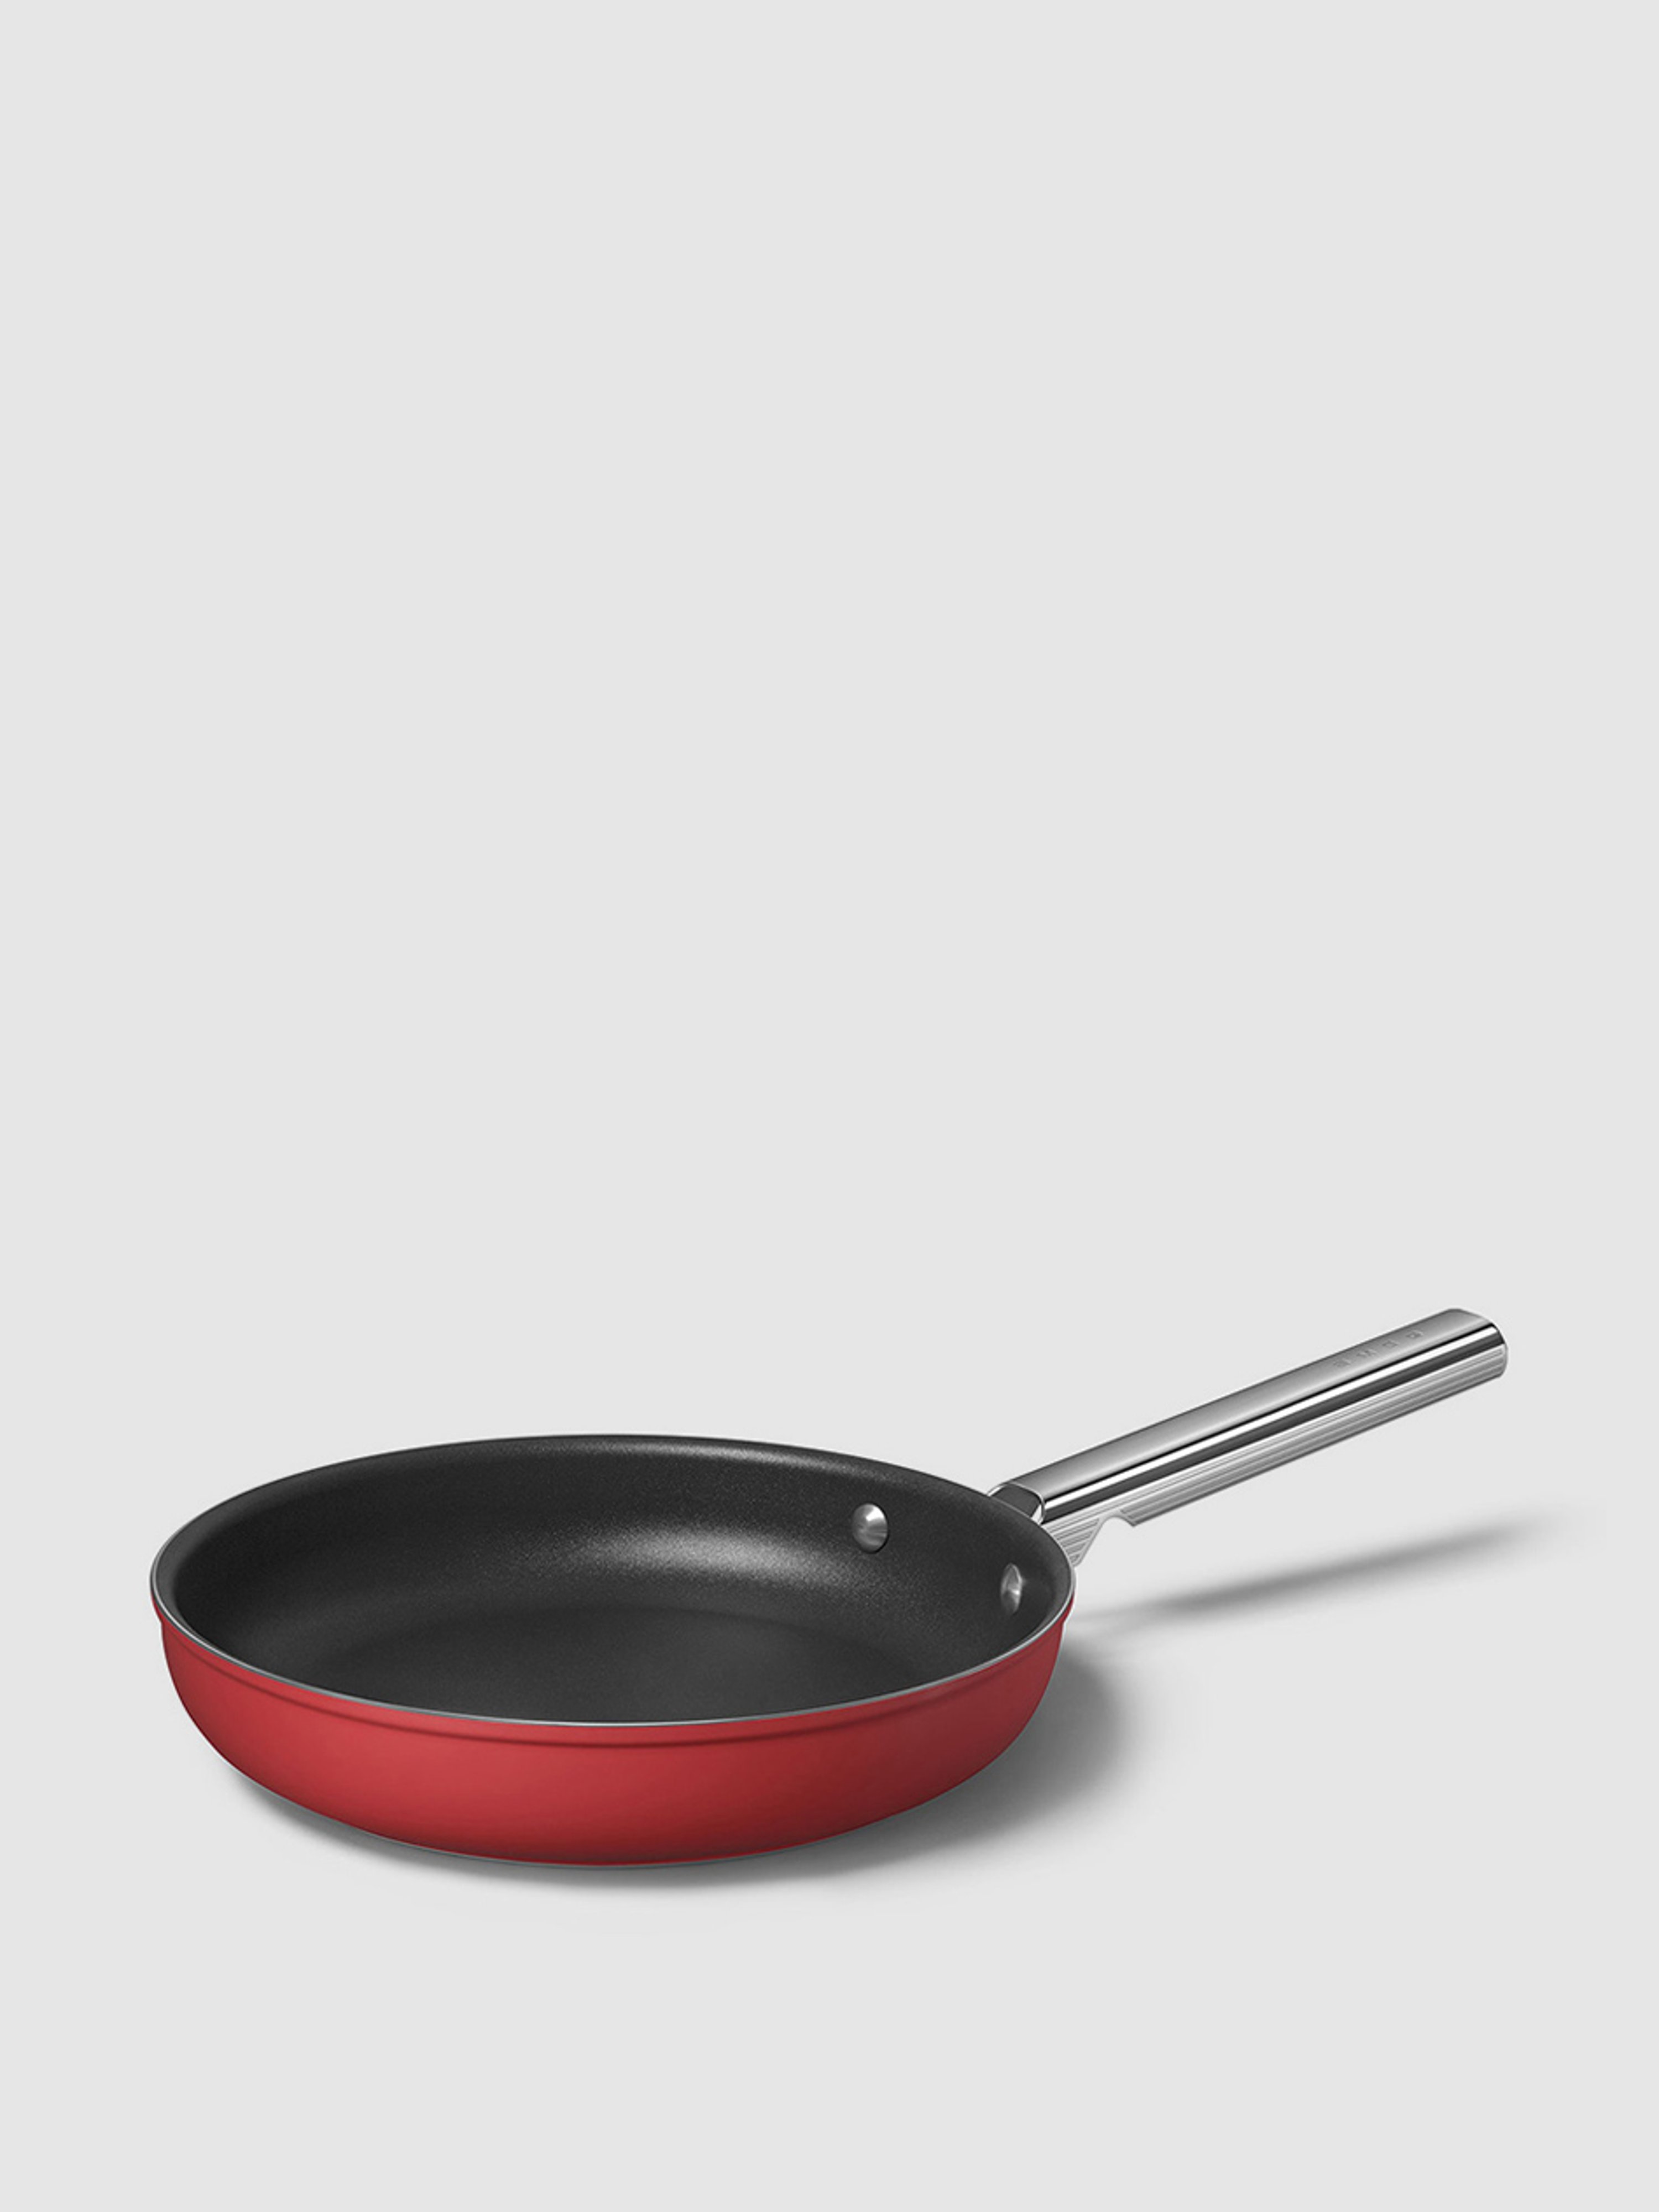 Smeg 10" Nonstick Frypan In Red